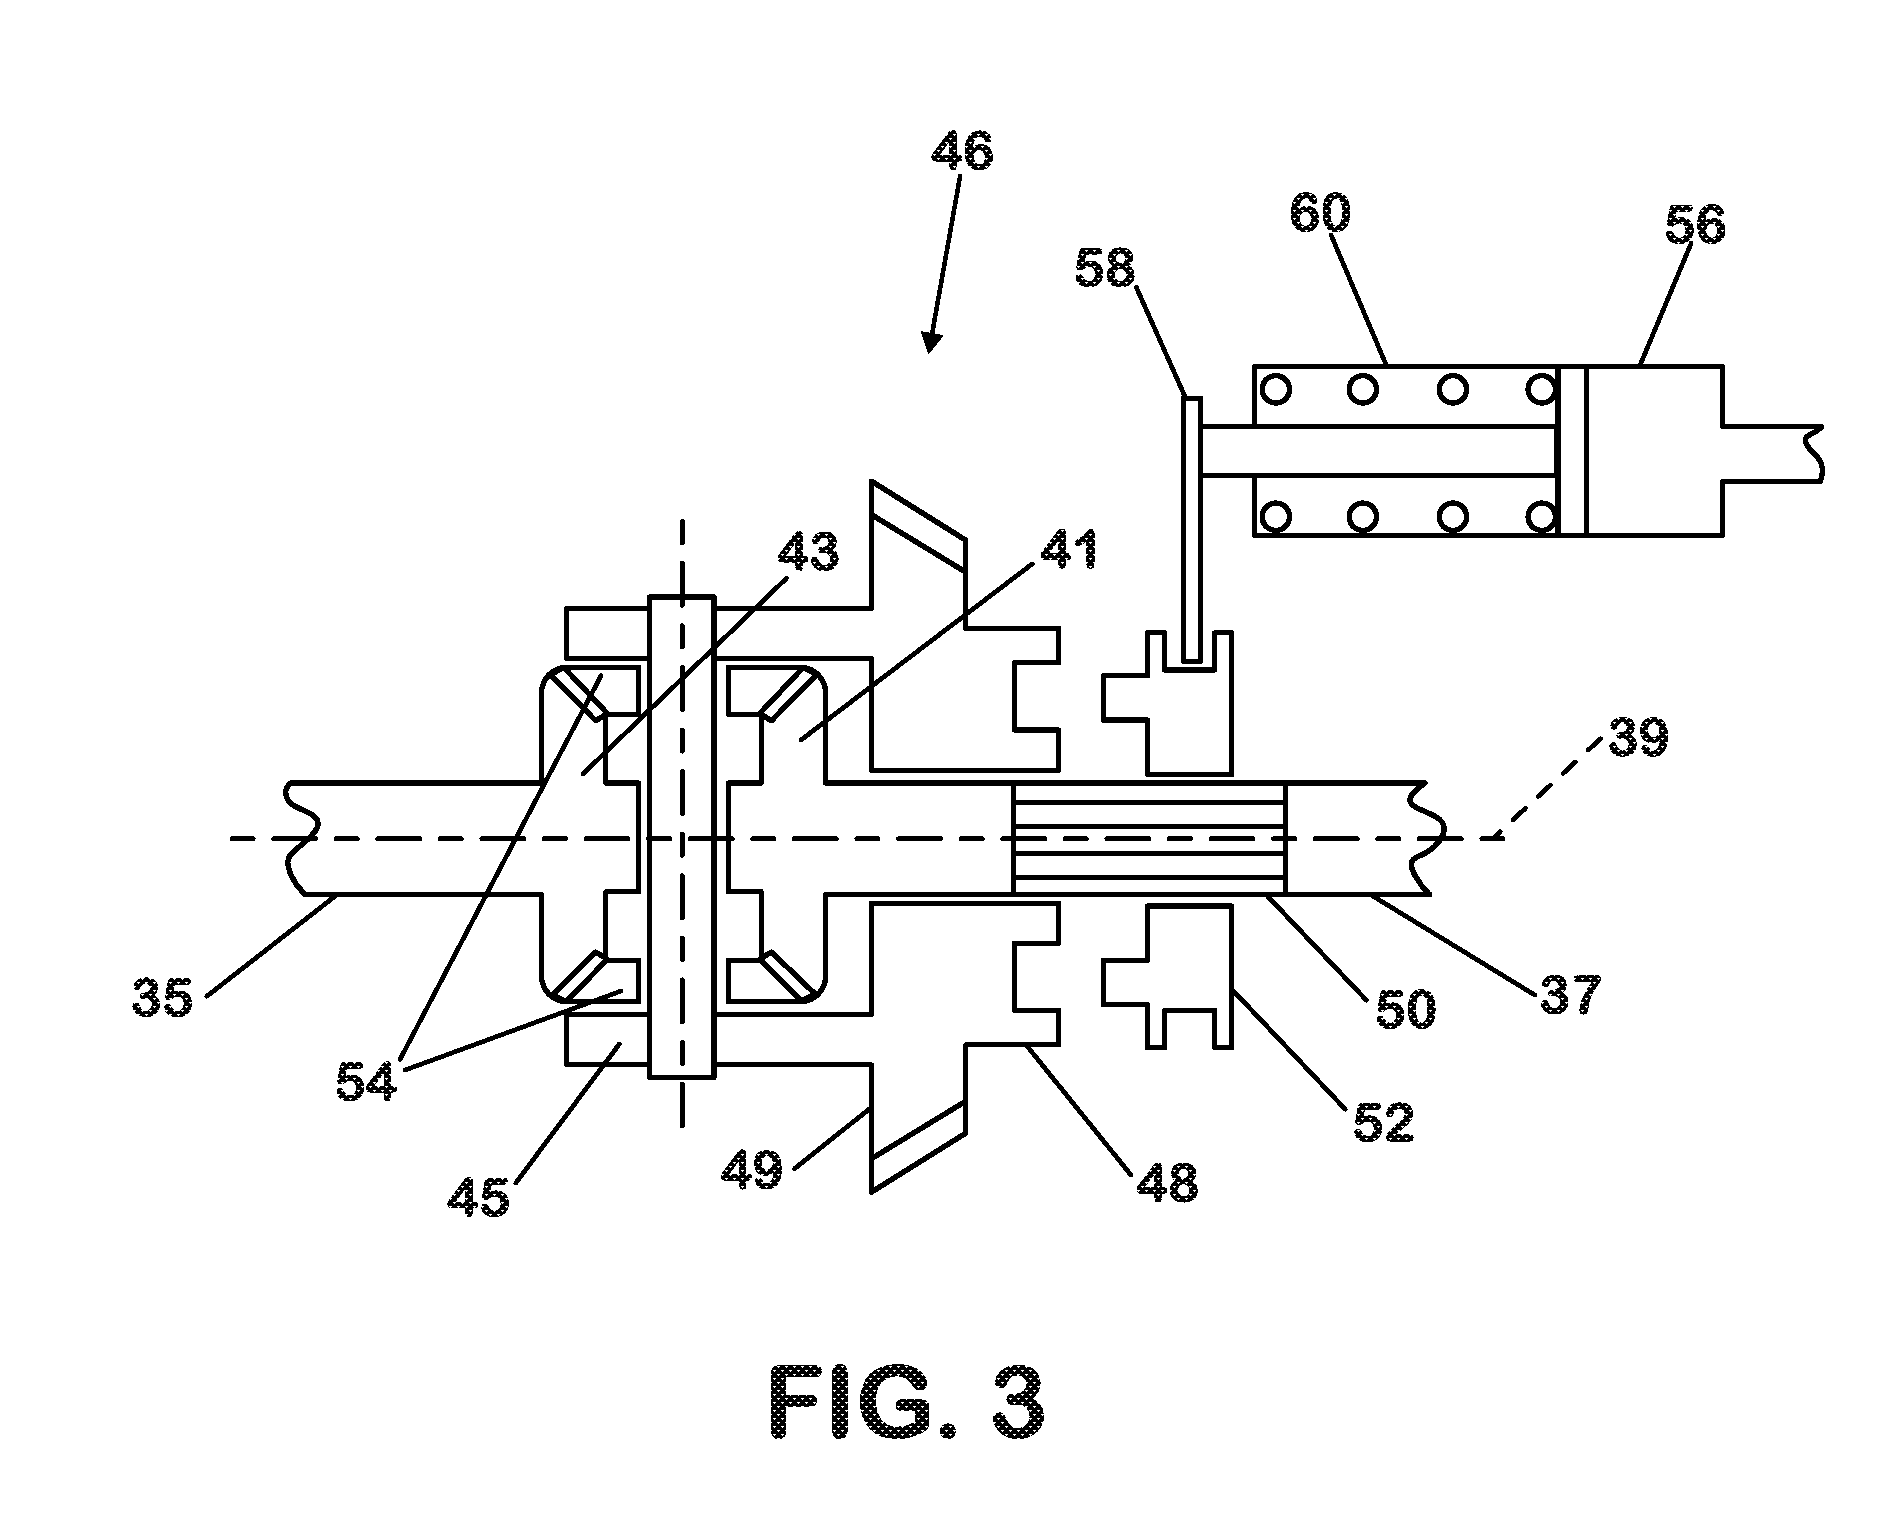 Automated differential lock